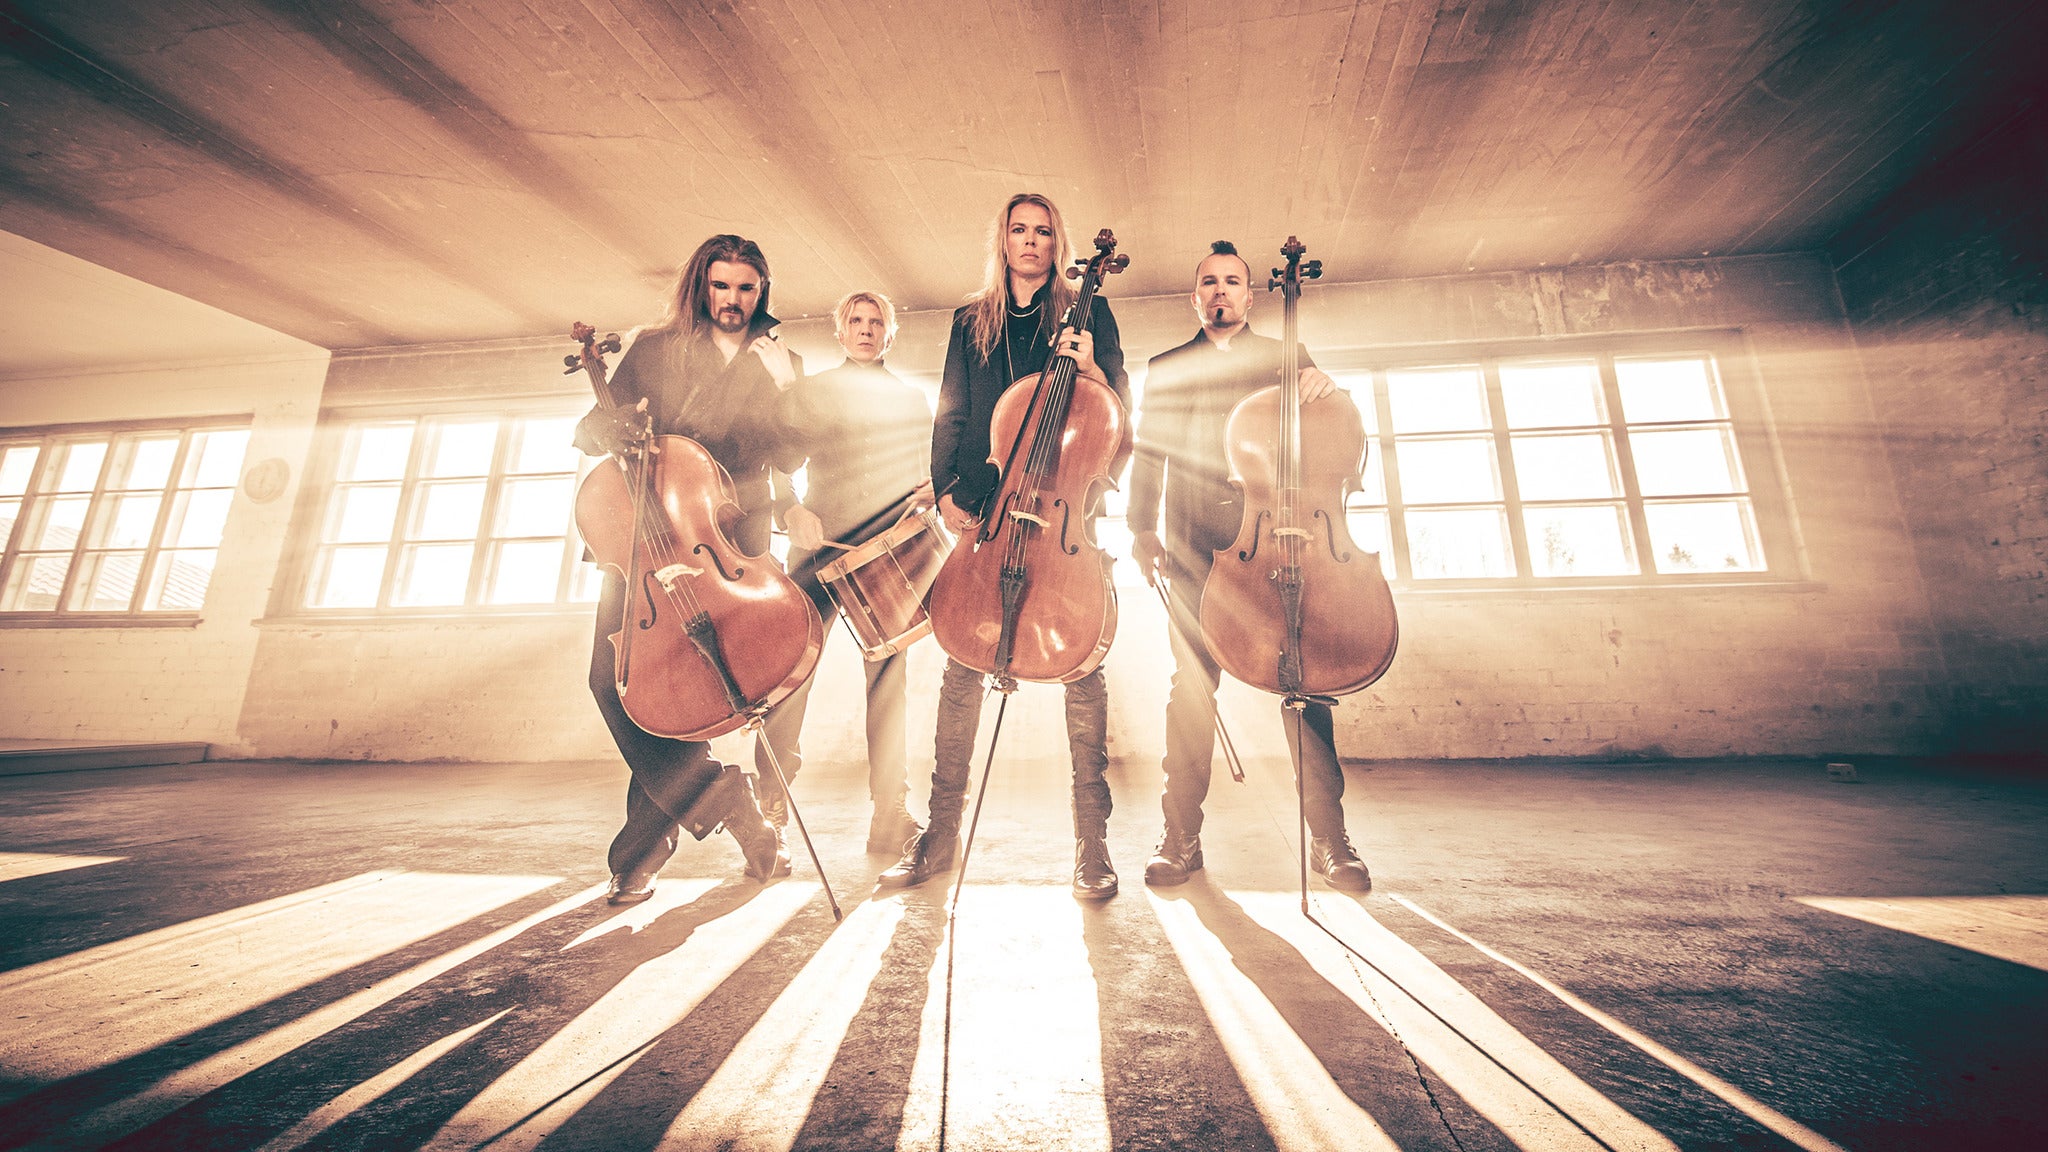 Apocalyptica - Cell-0 Tour at The Paramount